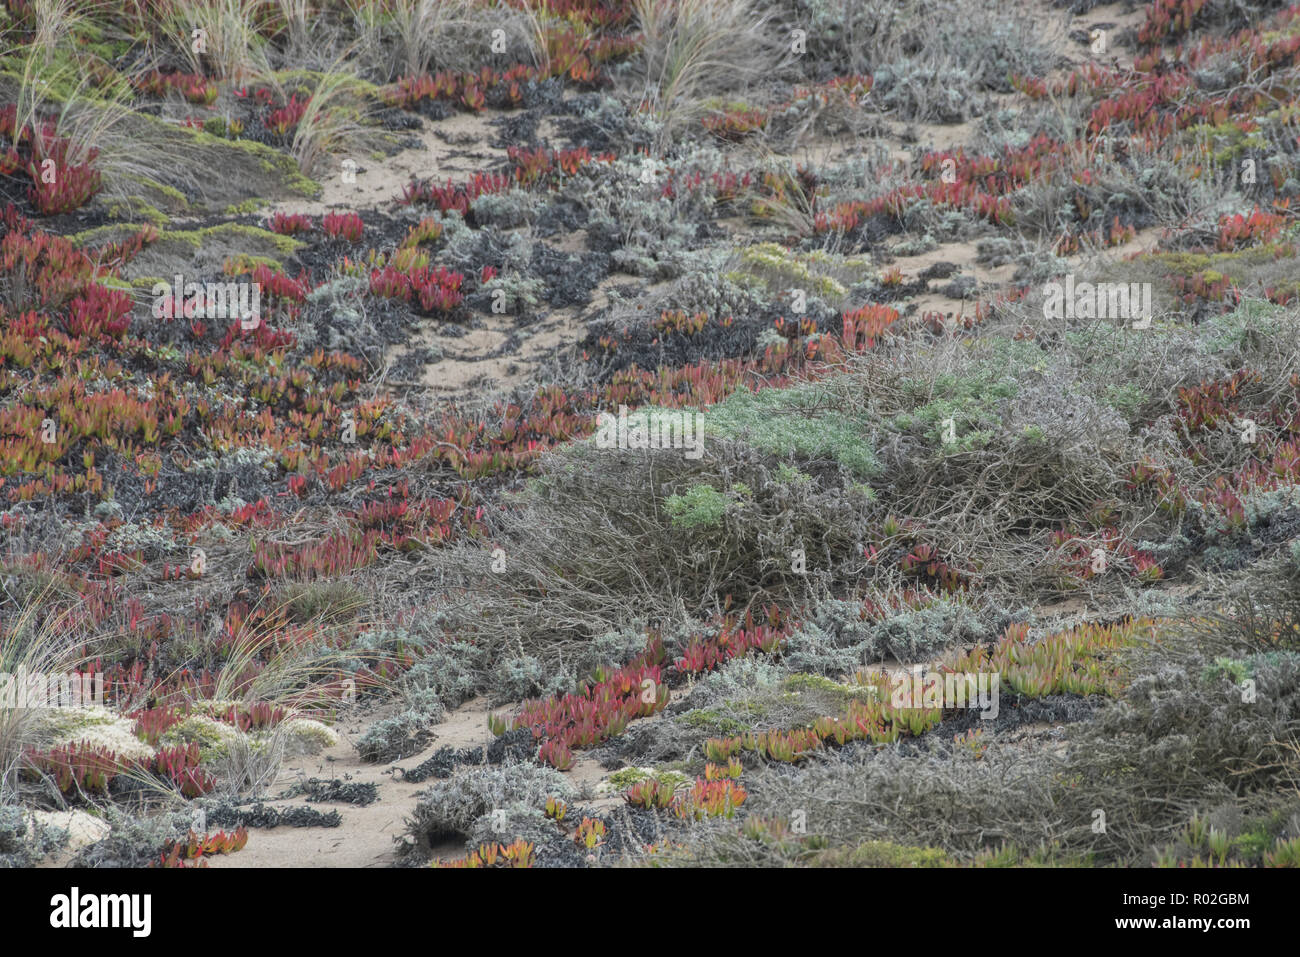 A colorful assortment of beach plants grow on the sandy dunes near the beach in Point Reyes, CA. Stock Photo